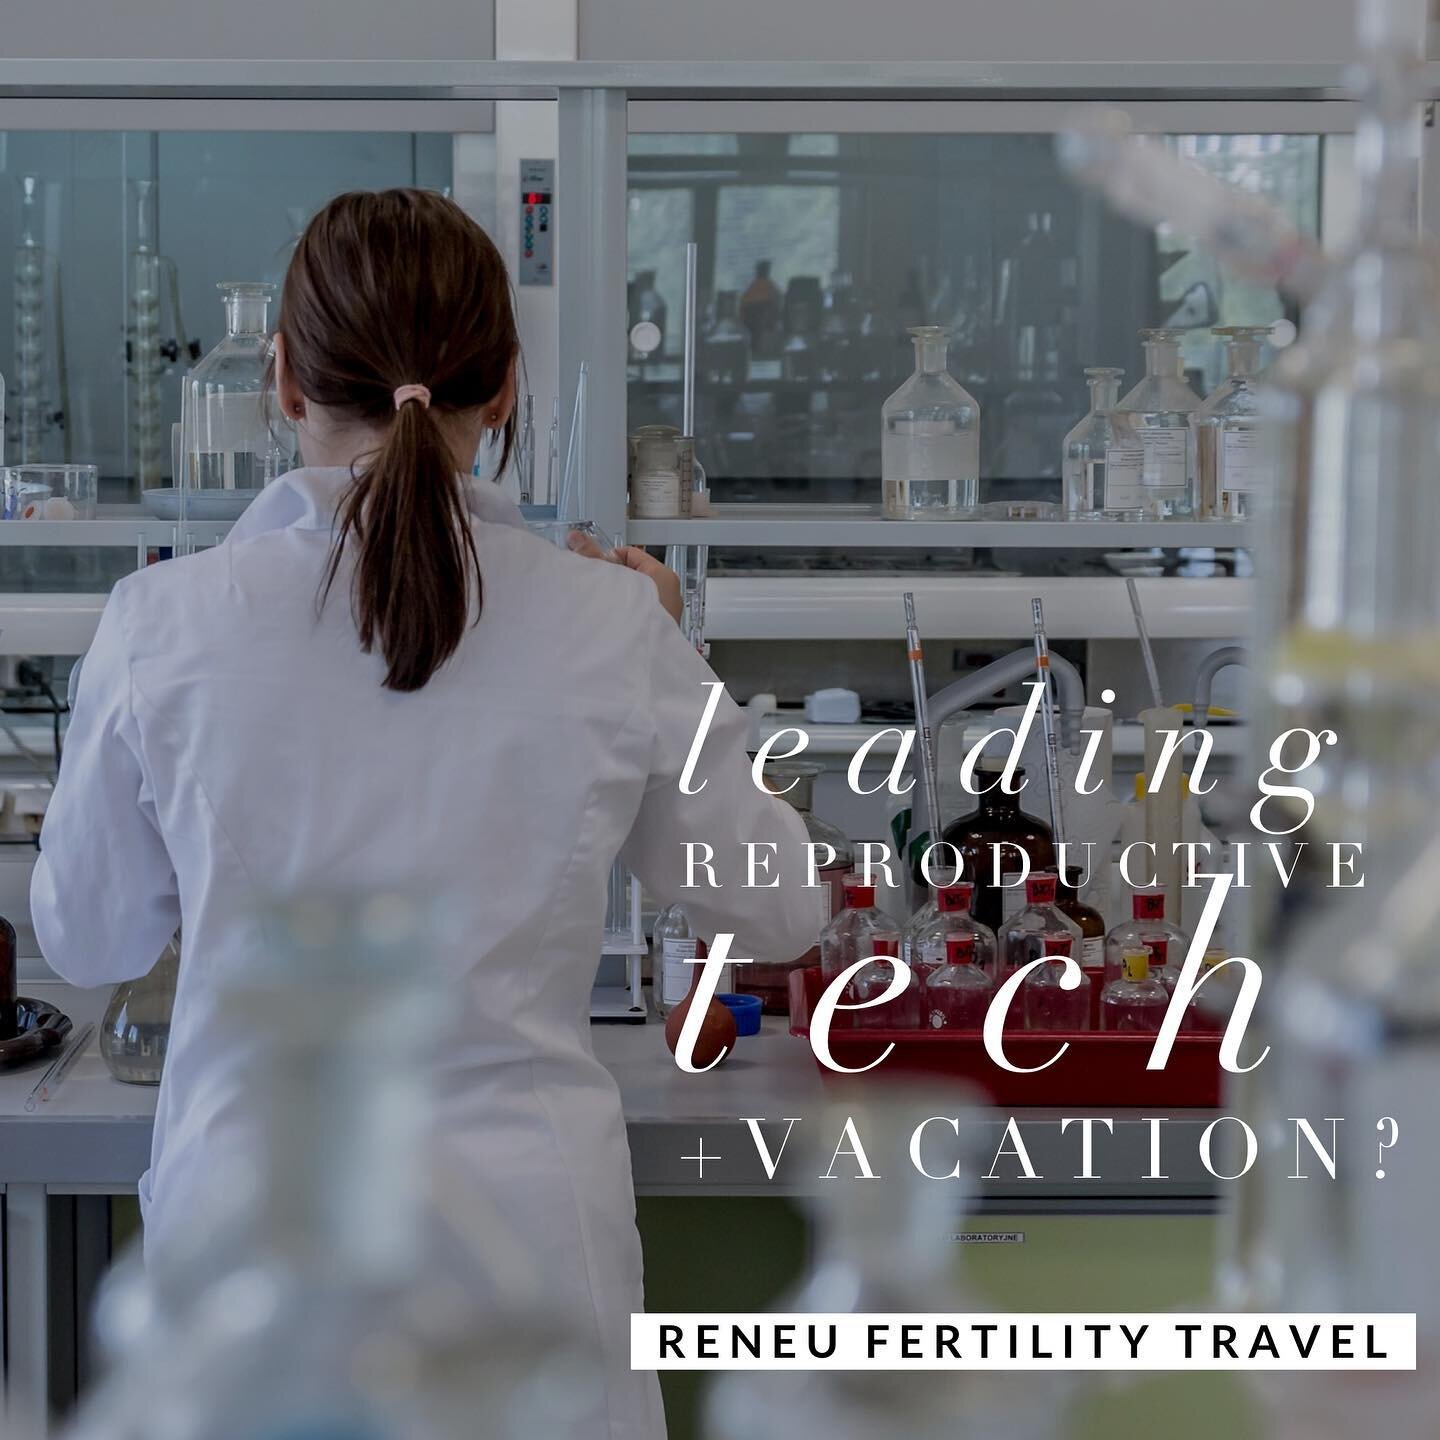 Success metrics consistent with the US, at approximately 1/3 the price - and, vacation! 
#ttc #fertility #fertilitytravel #infertility #eggfreezing #capetownsouthafrica #capetown #capetownetc #fertilitydoctor #womeninmedicine